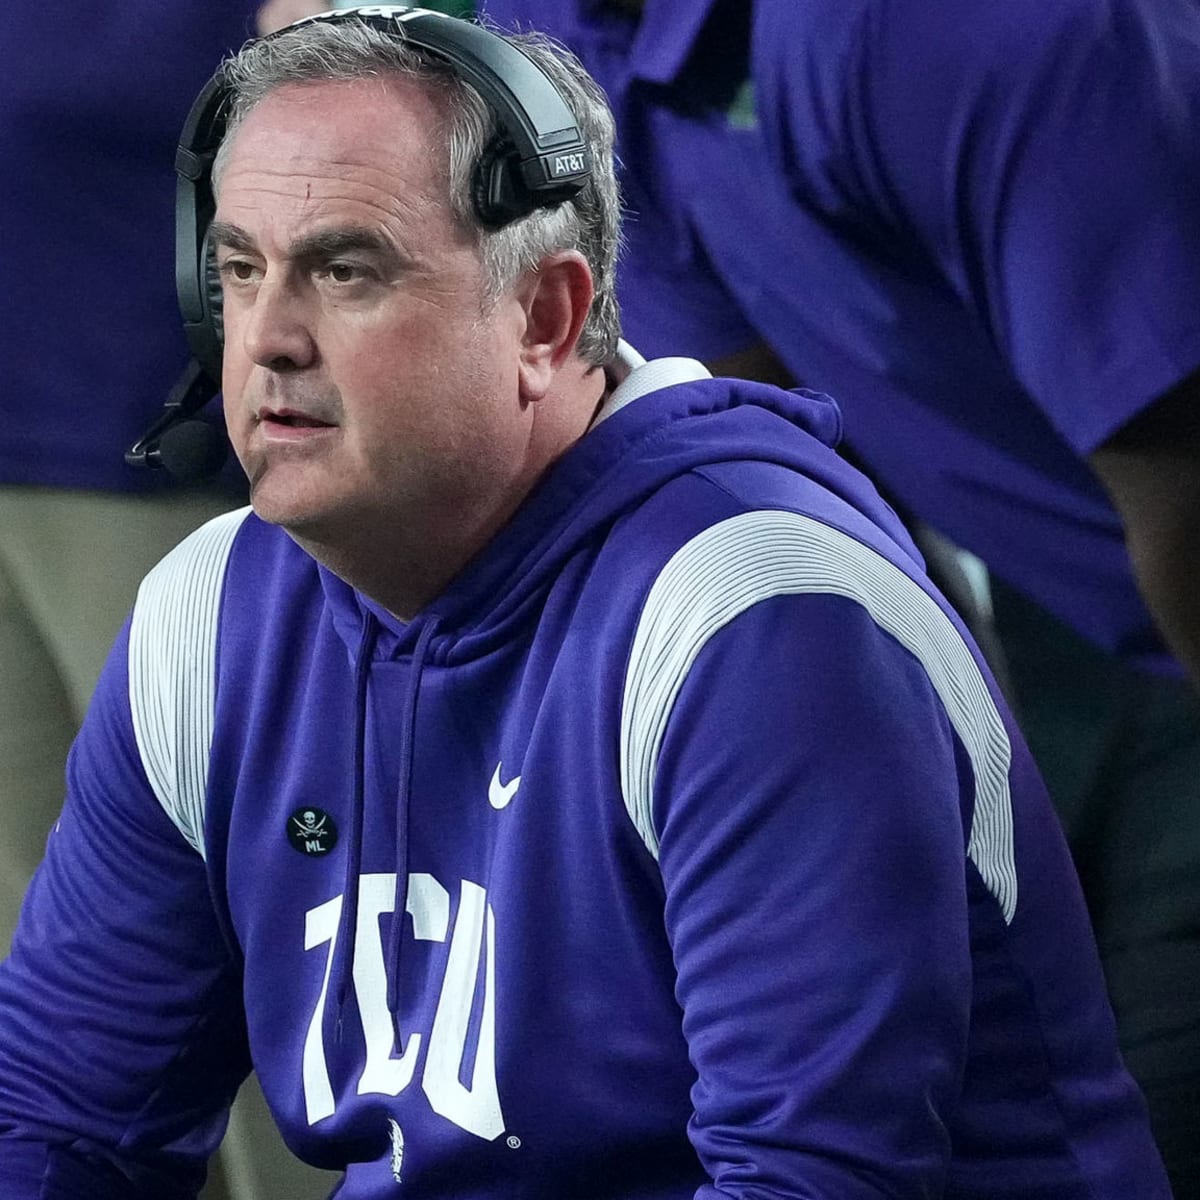 SEC has some teams share TCU fans' feelings of frustration over success -   | Expert Predictions, Picks, and Previews